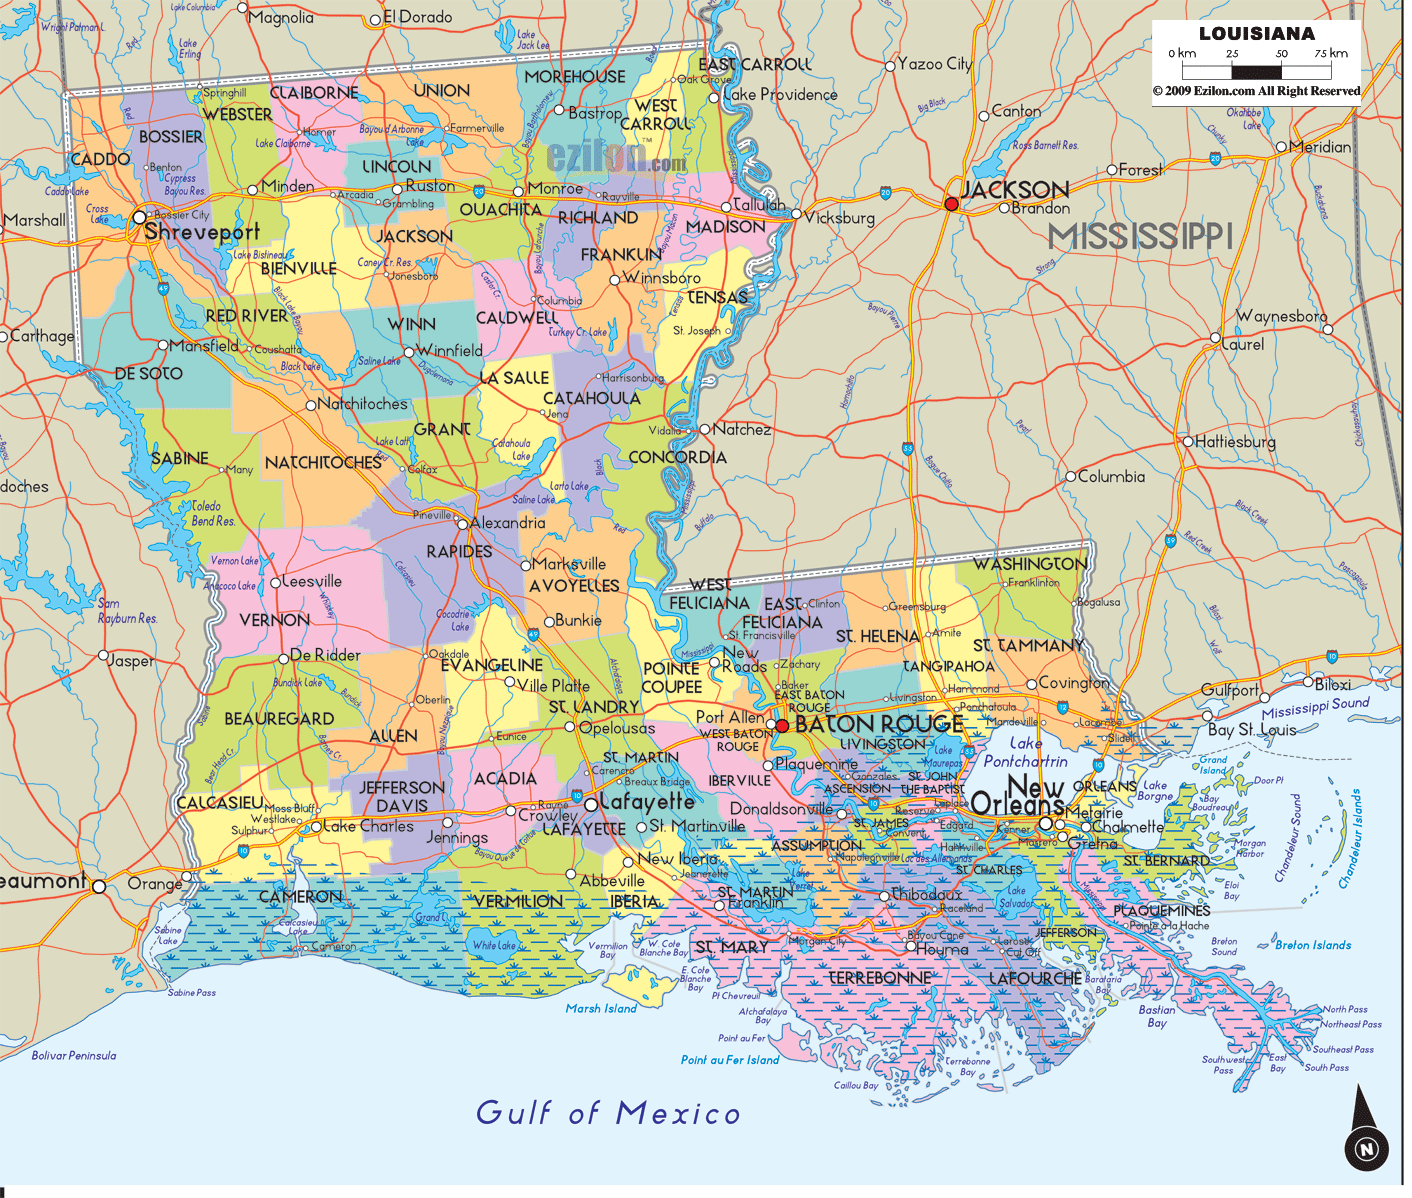 Louisiana State Maps With Cities